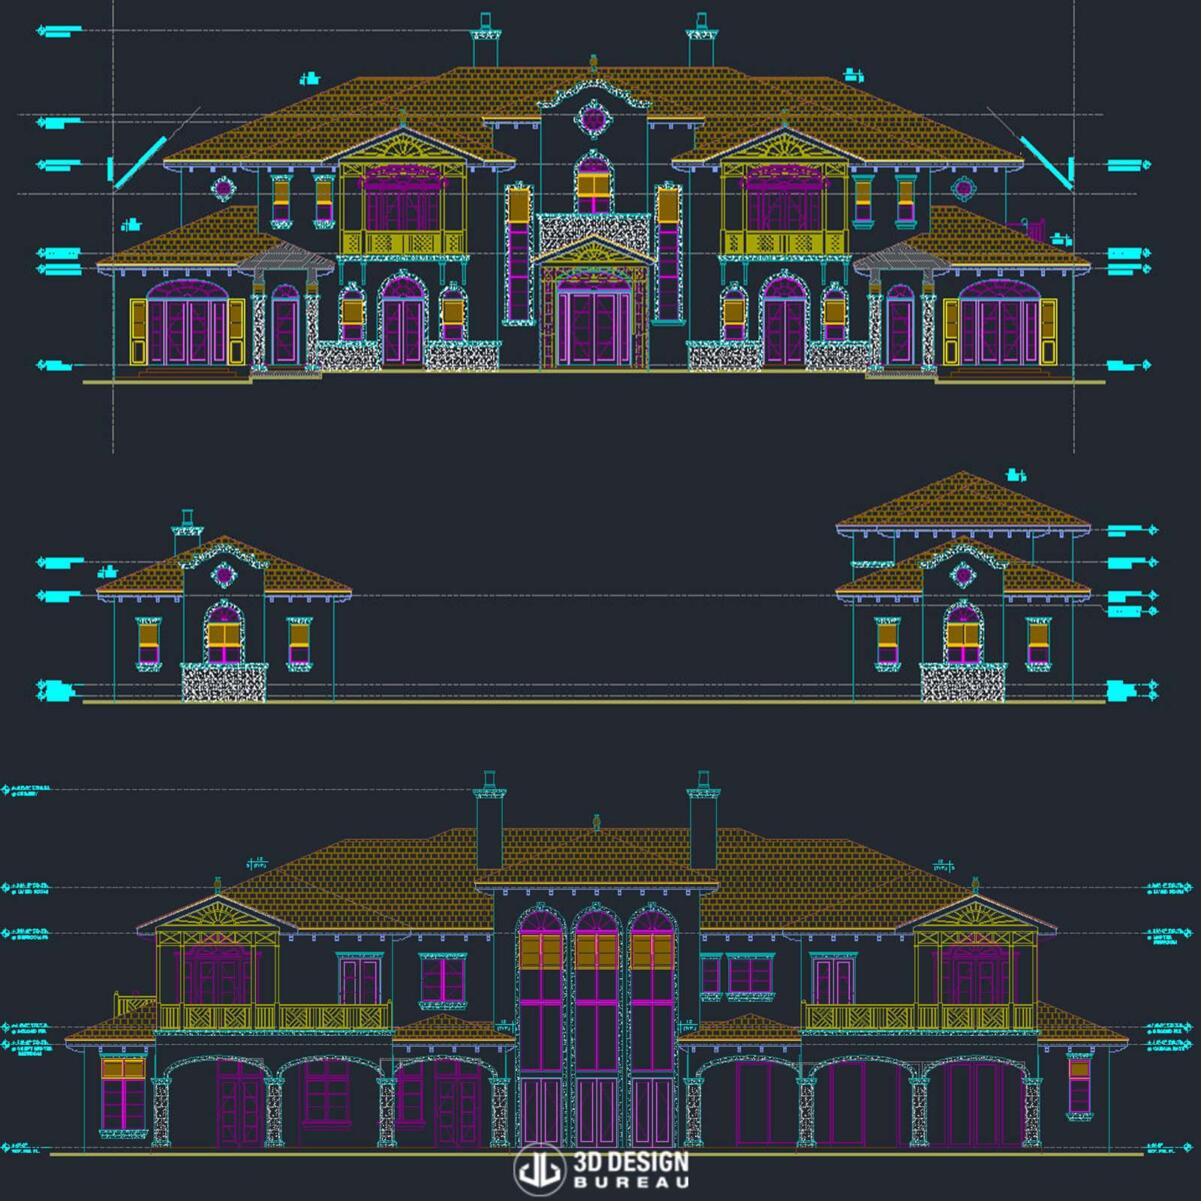 Elevation drawings of the Vero Beach mansion, 2010